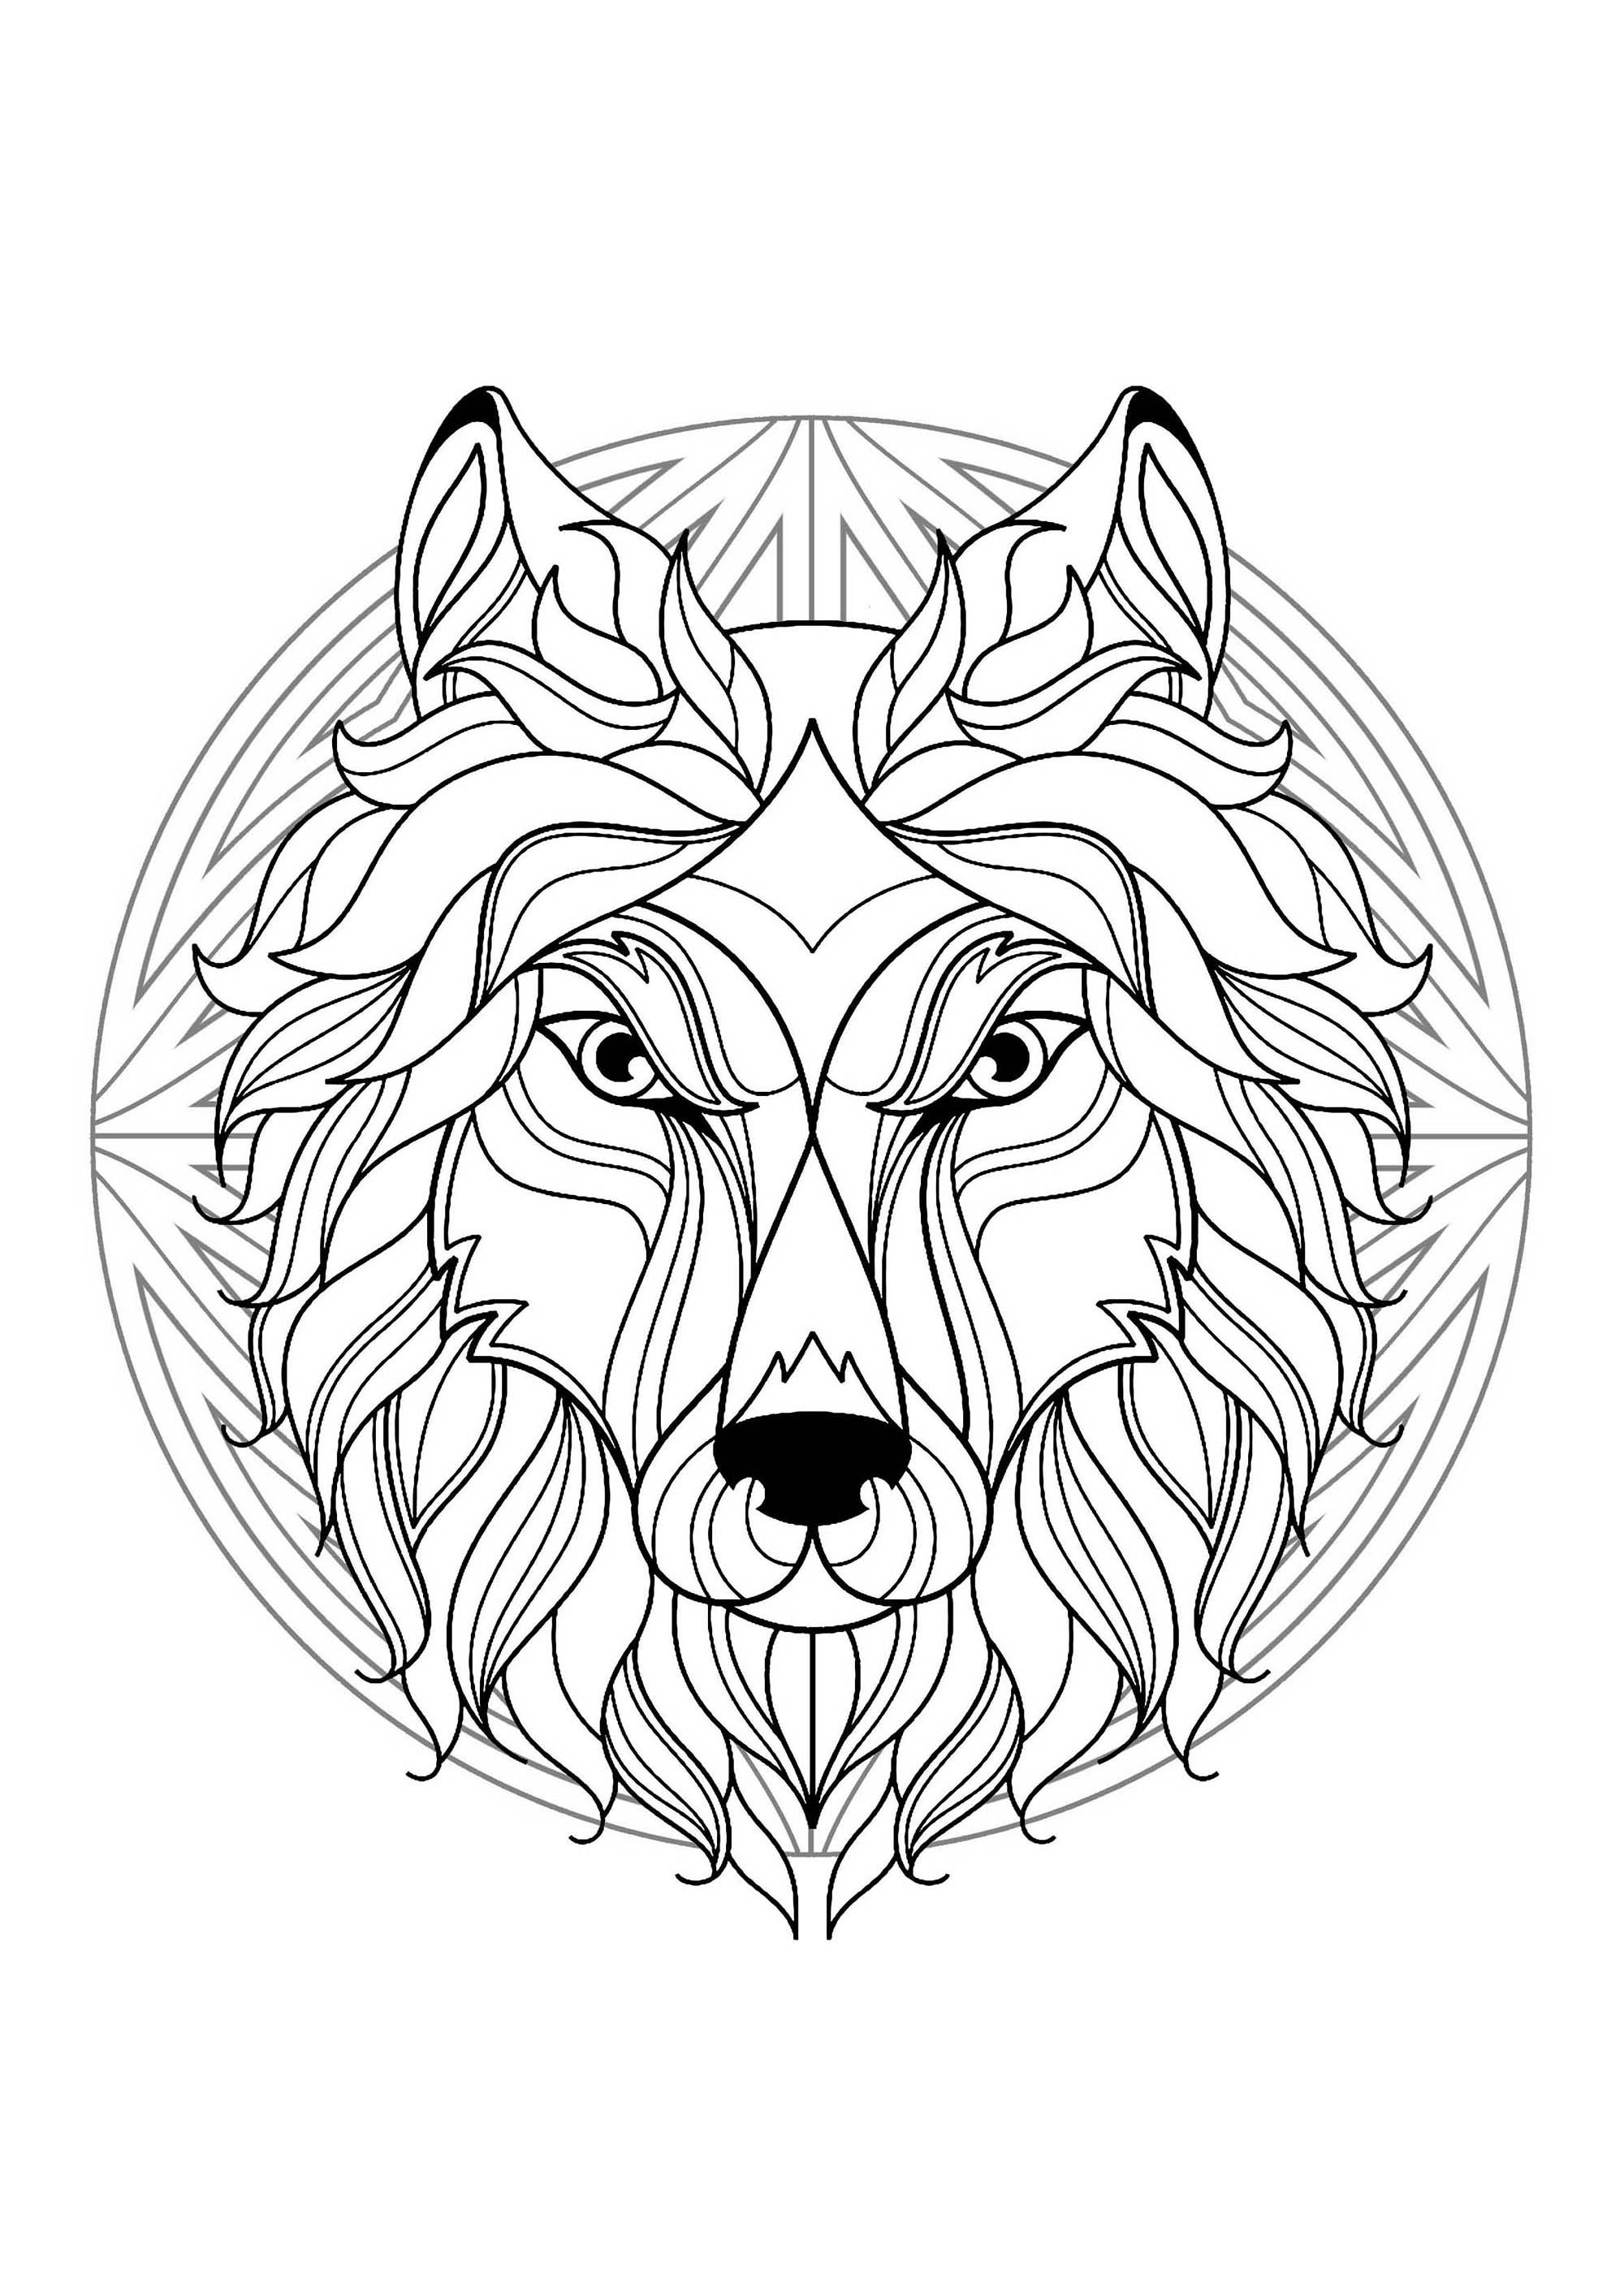 Complex Mandala coloring page with wolf head - 1 - Difficult Mandalas (for  adults)